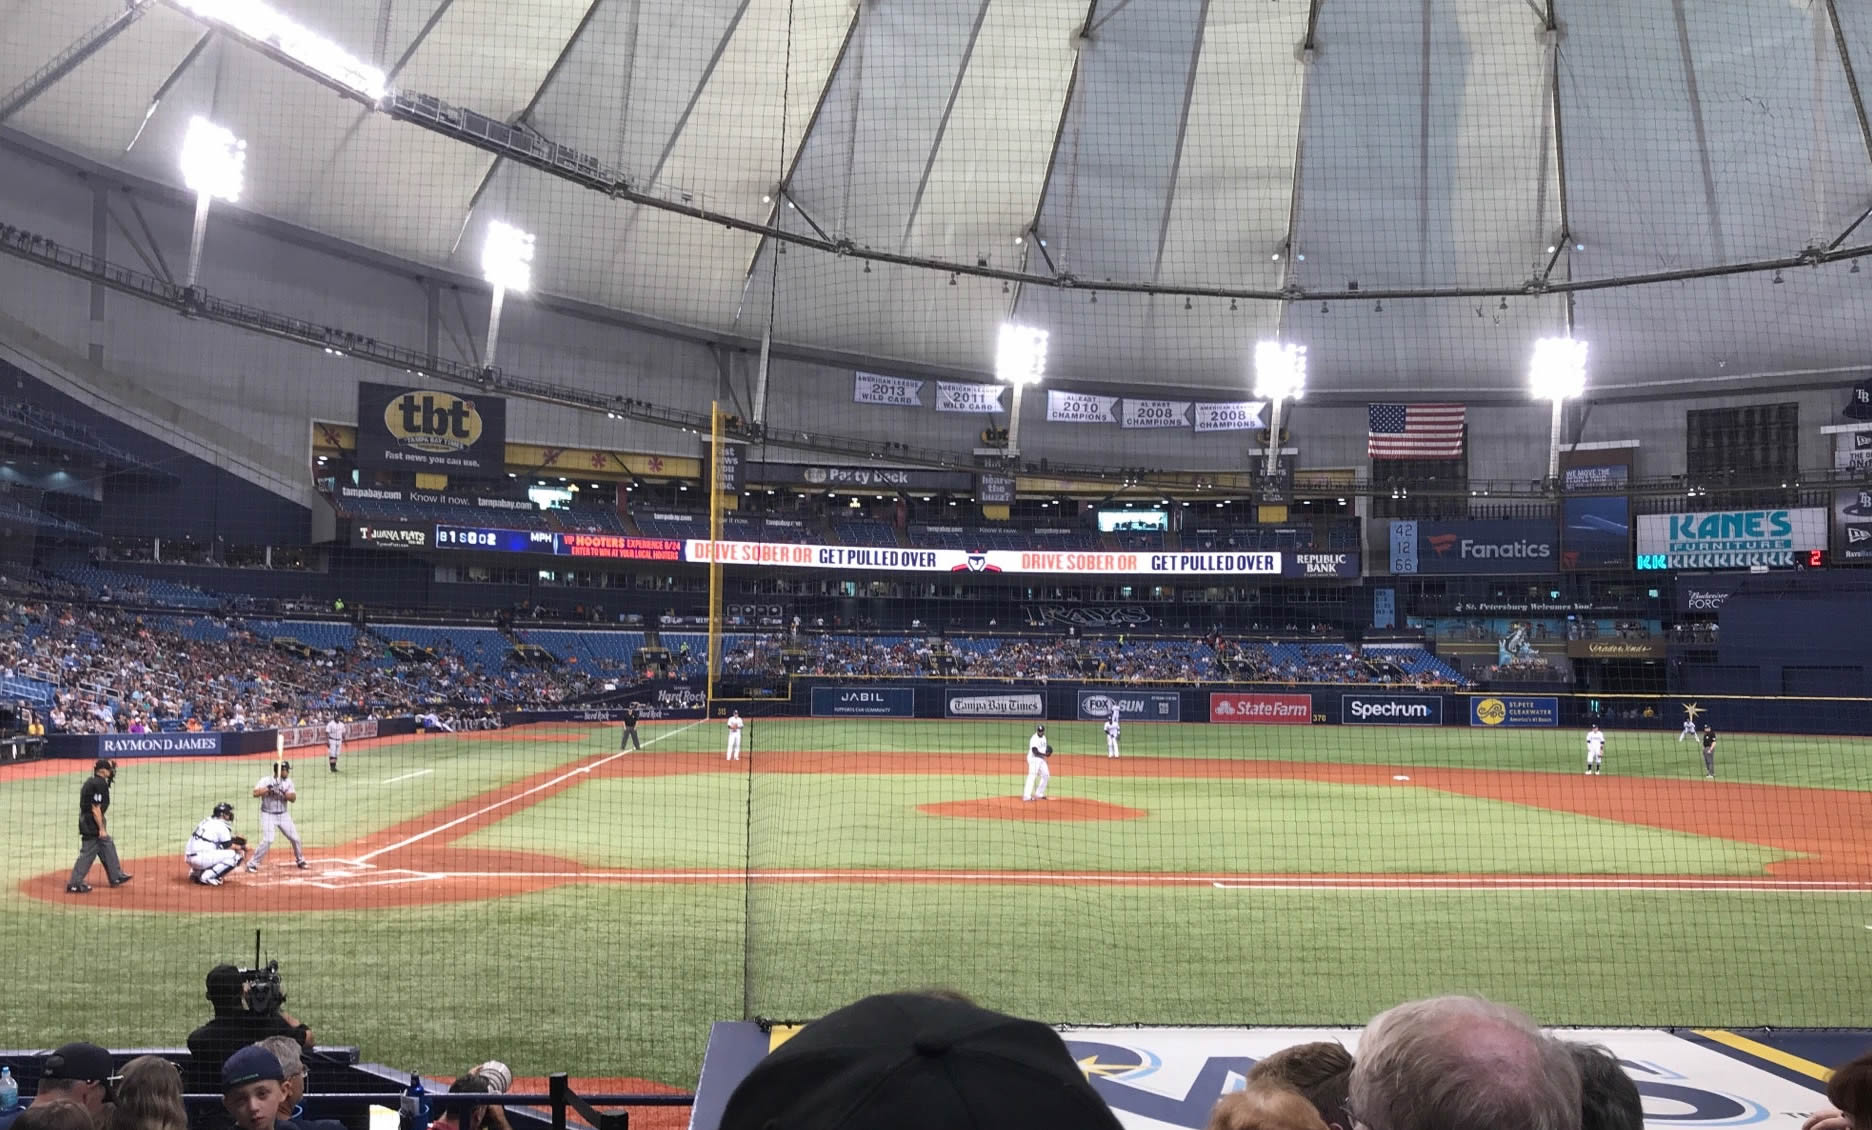 section 112, row p seat view  for baseball - tropicana field